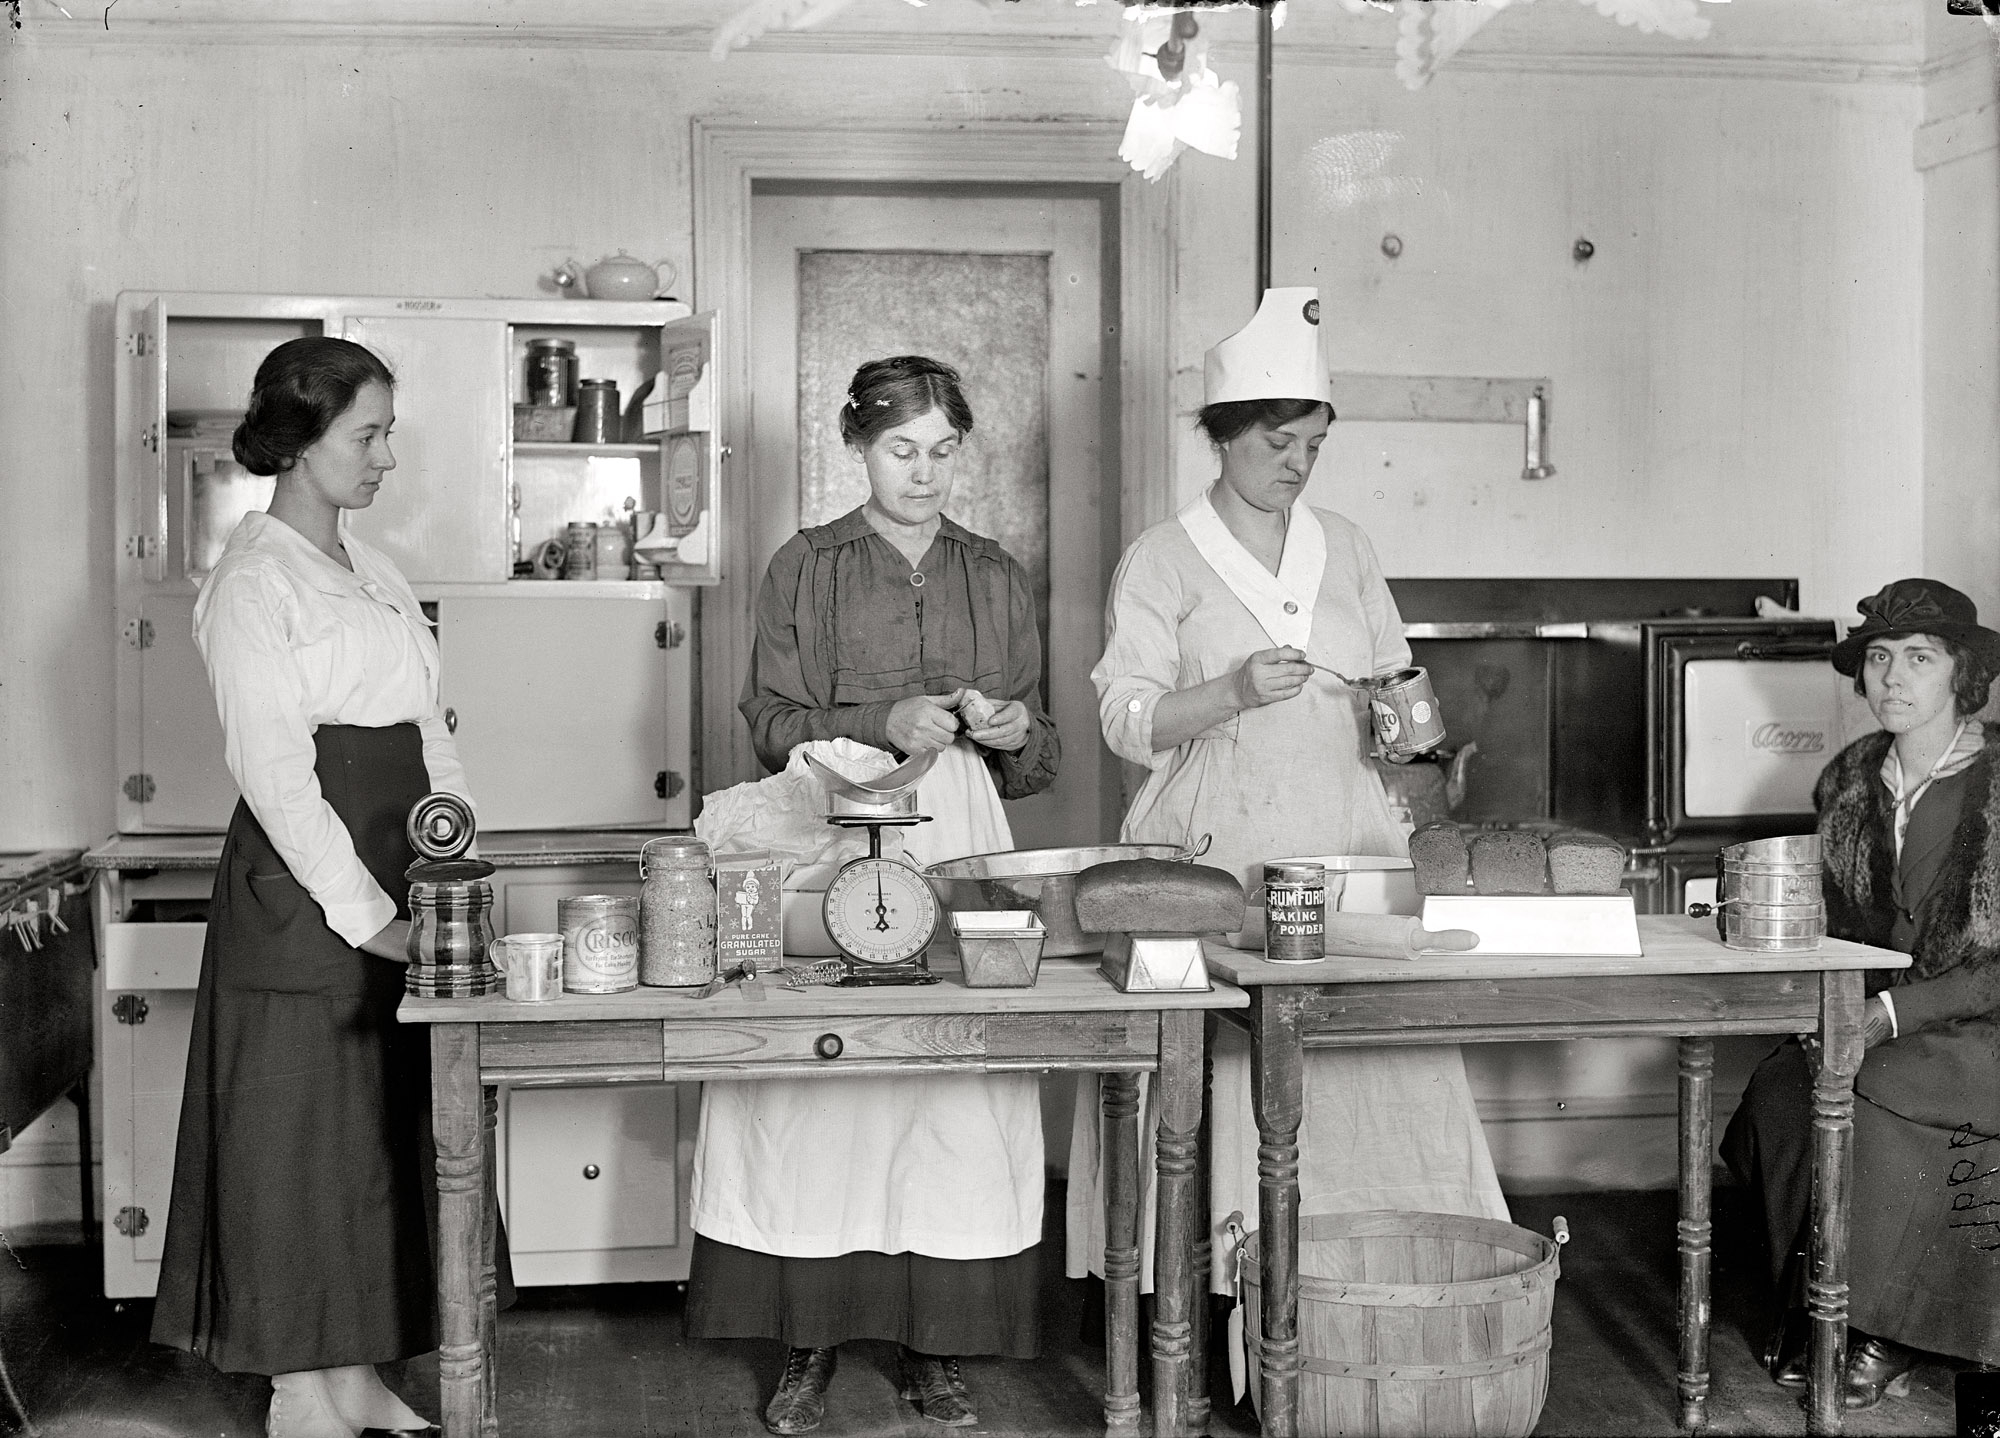 Washington, 1917. "U.S. Food Administration war kitchen." Harris & Ewing Collection glass negative, Library of Congress. View full size.